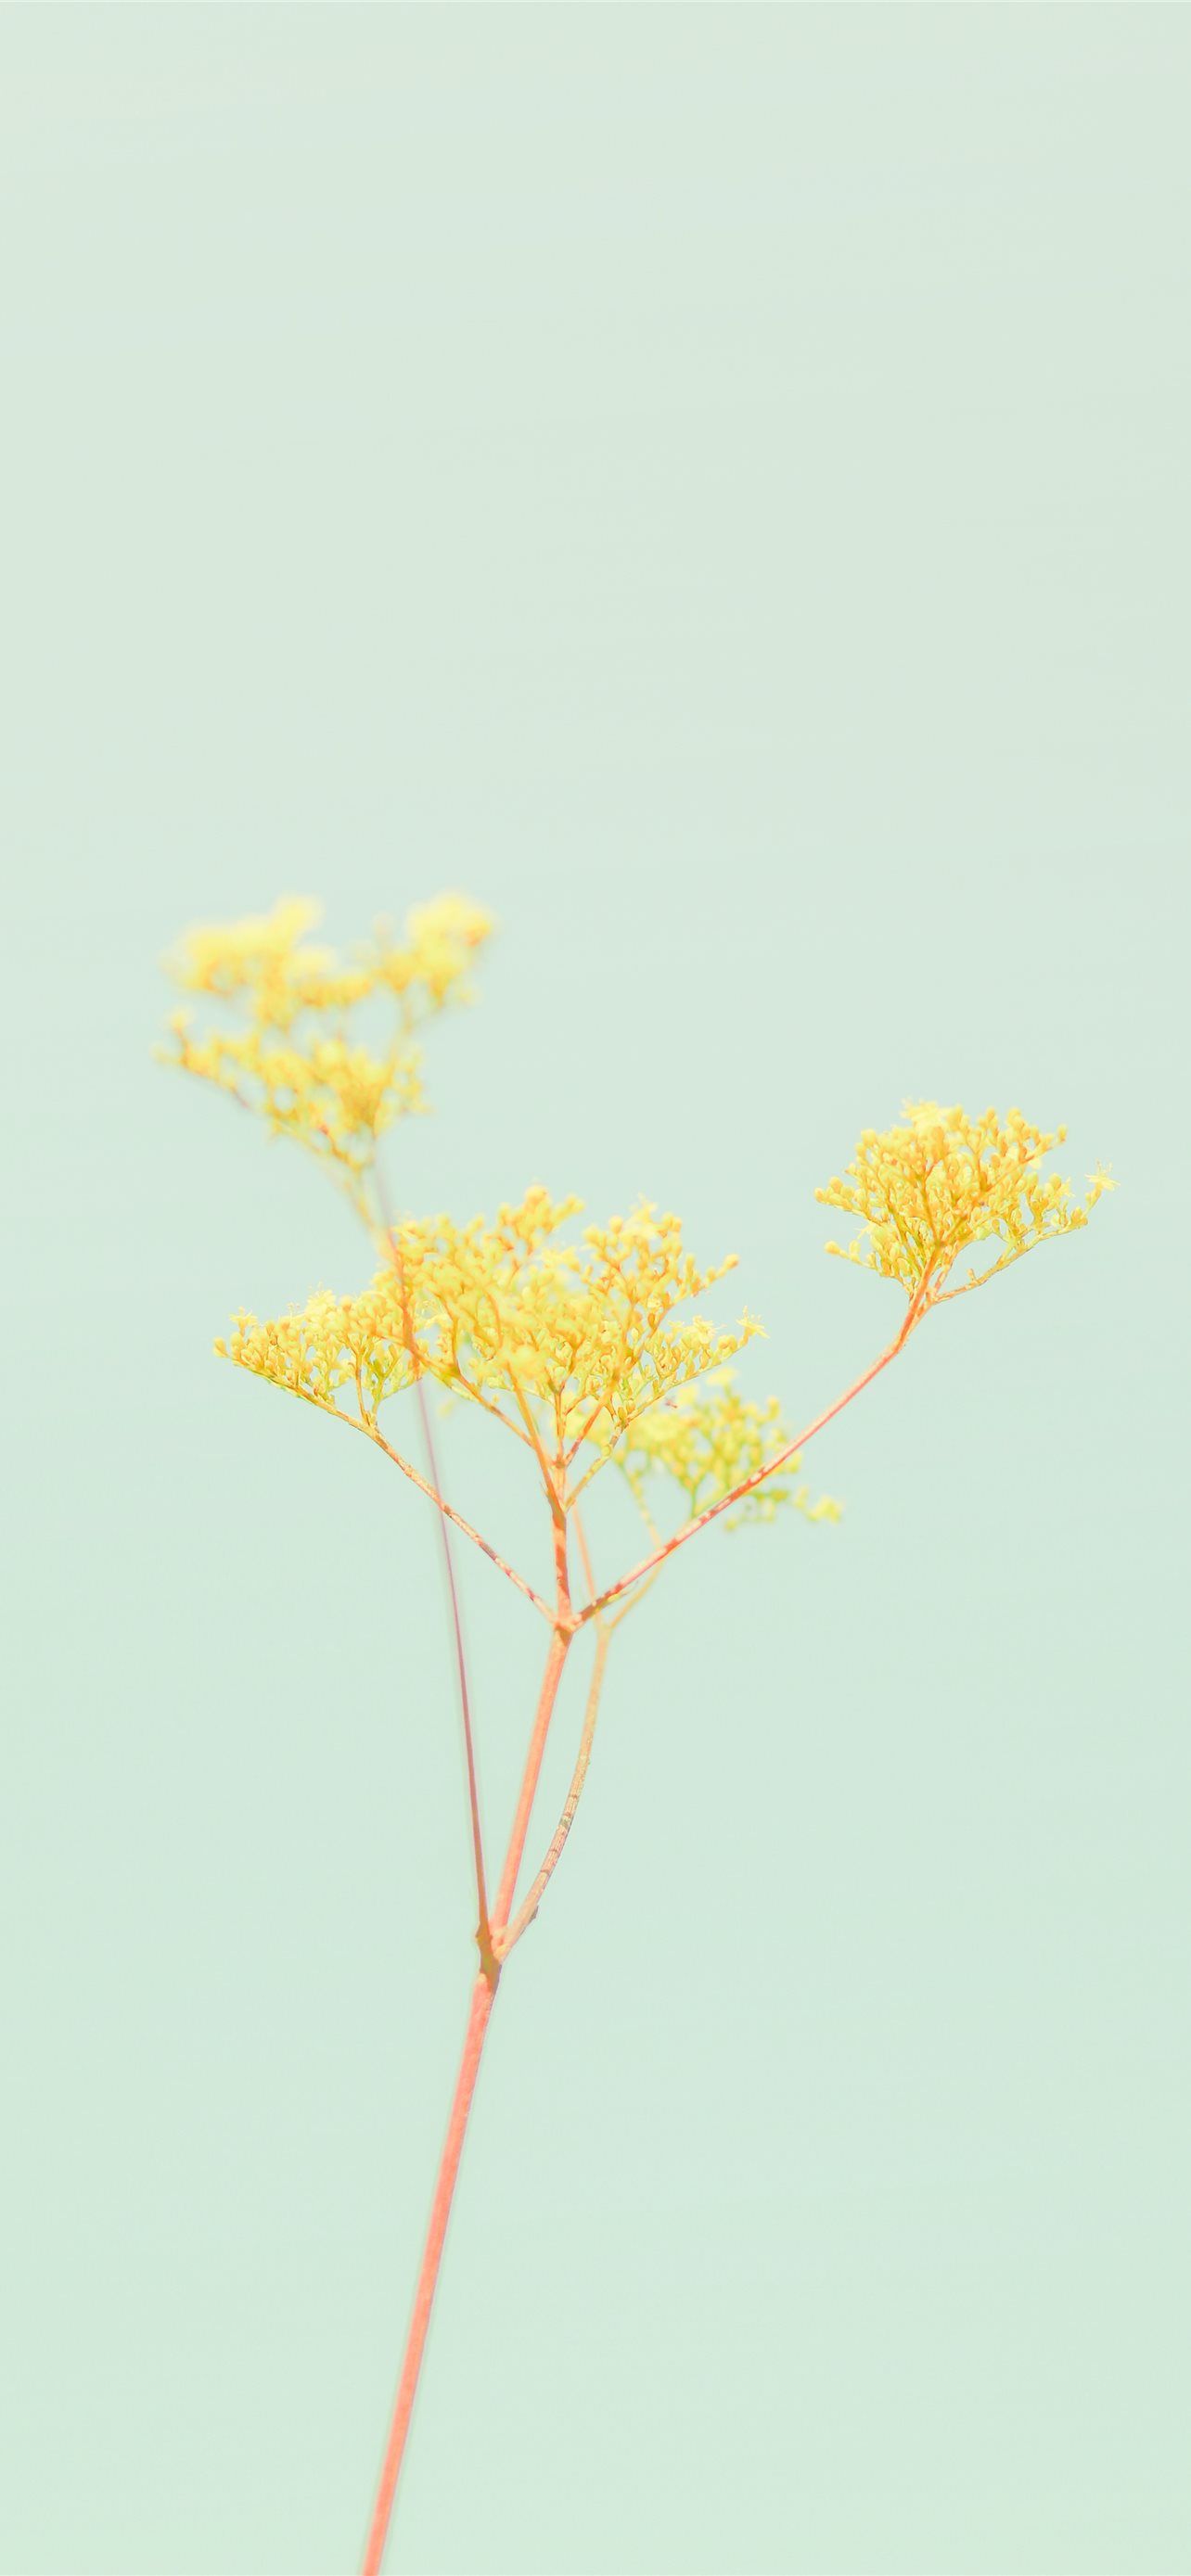 yellow leaf tree during daytime iPhone Wallpaper Free Download